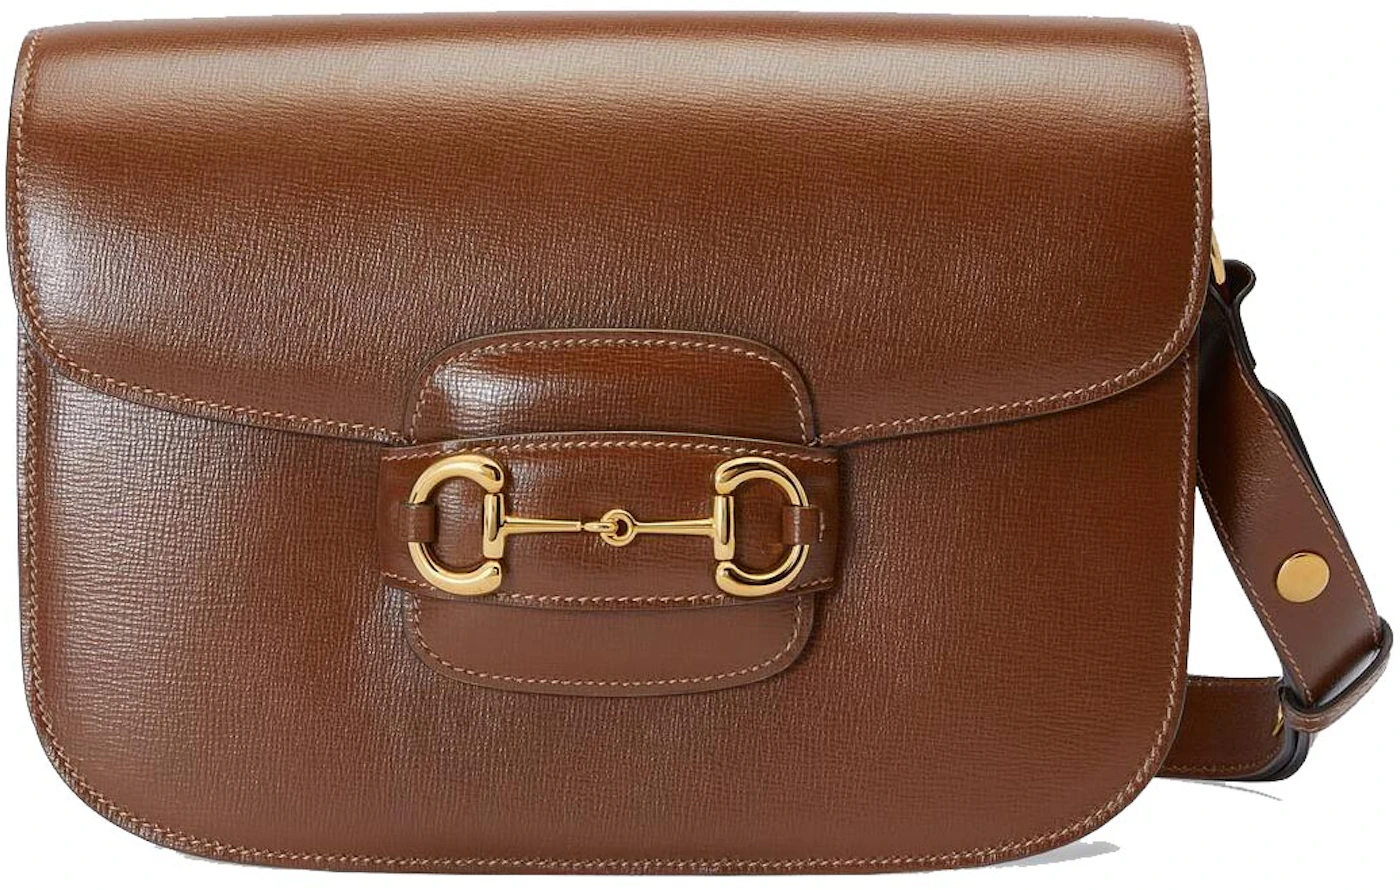 Gucci Horsebit 1955 Shoulder Bag Brown in Leather with Gold-tone - US